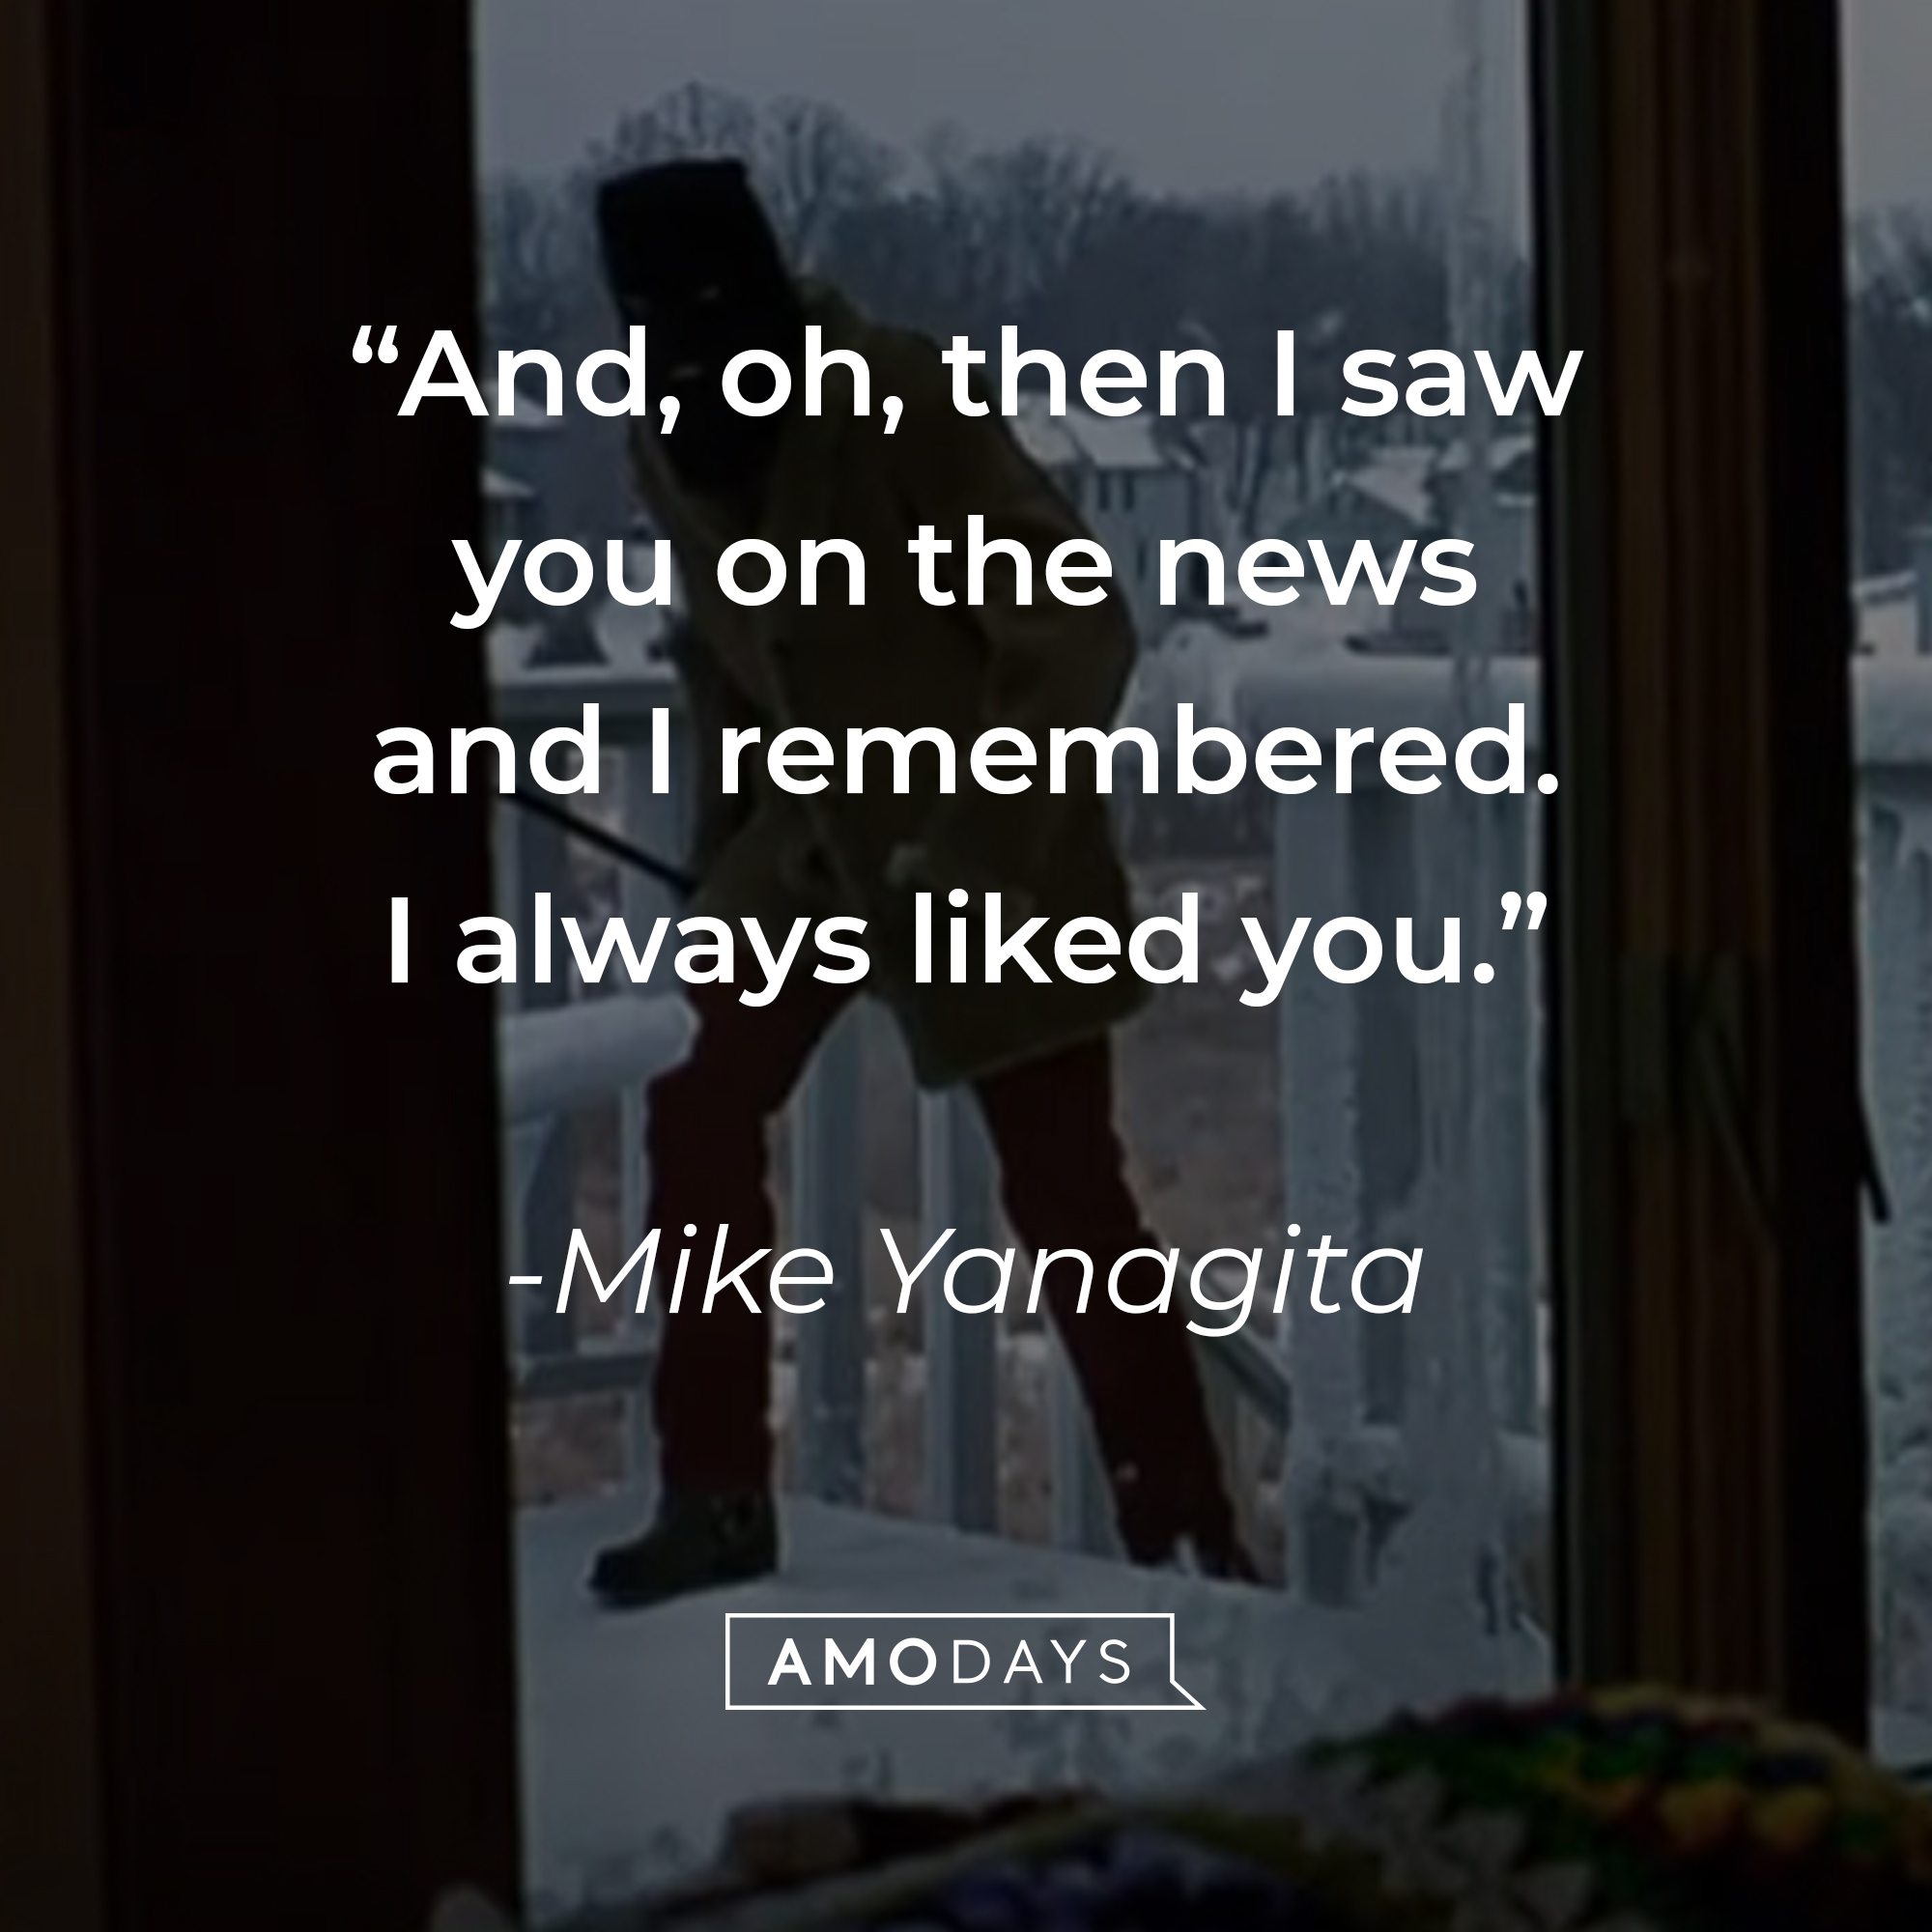 Mike Yanagita's quote: "And, oh, then I saw you on the news and I remembered. I always liked you." | Source: youtube.com/MGMStudios